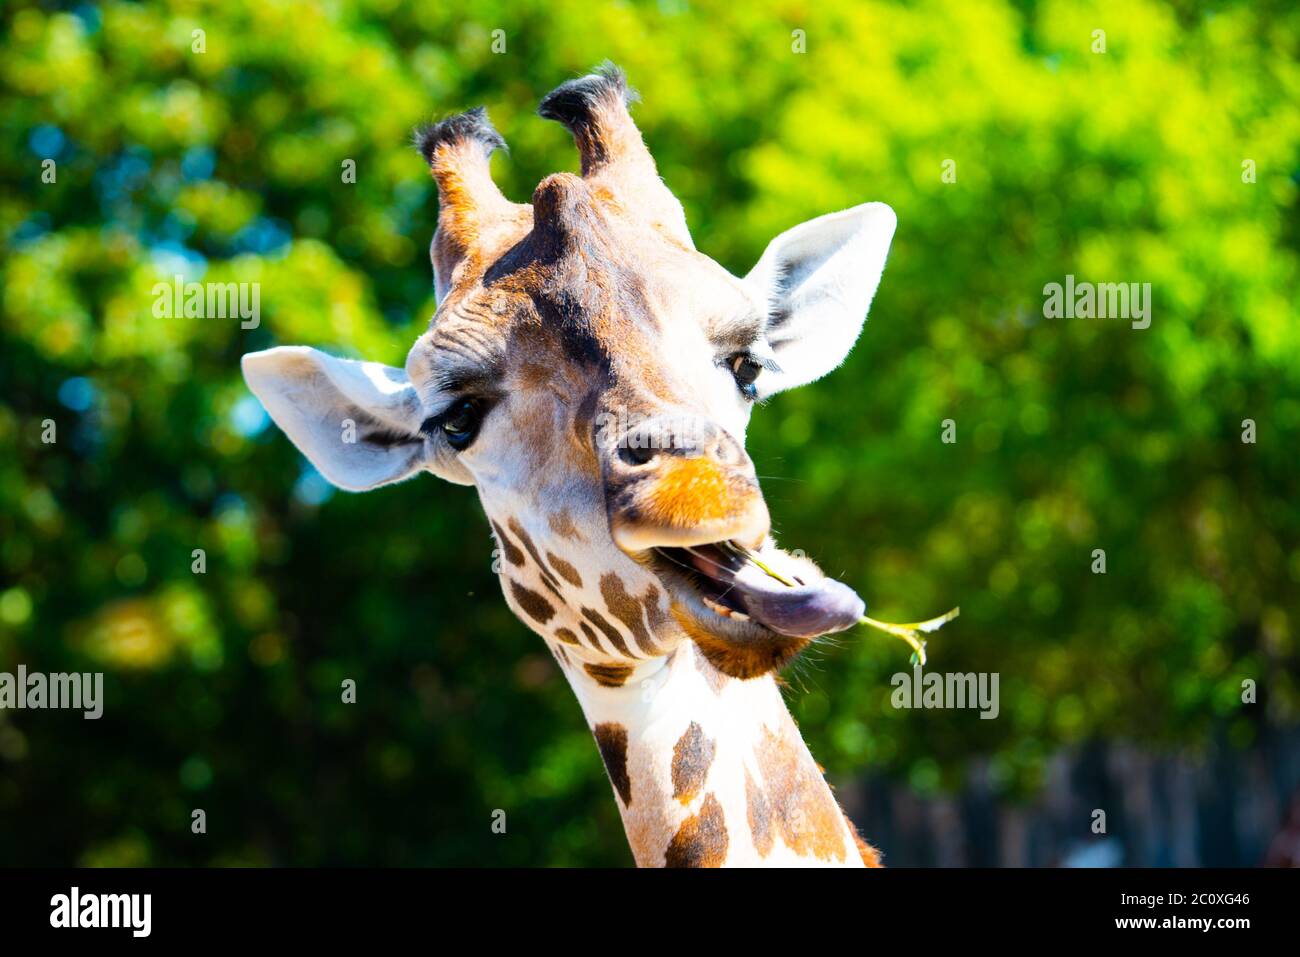 Portrait of giraffe with long tongue chewing small twig from tree. Stock Photo